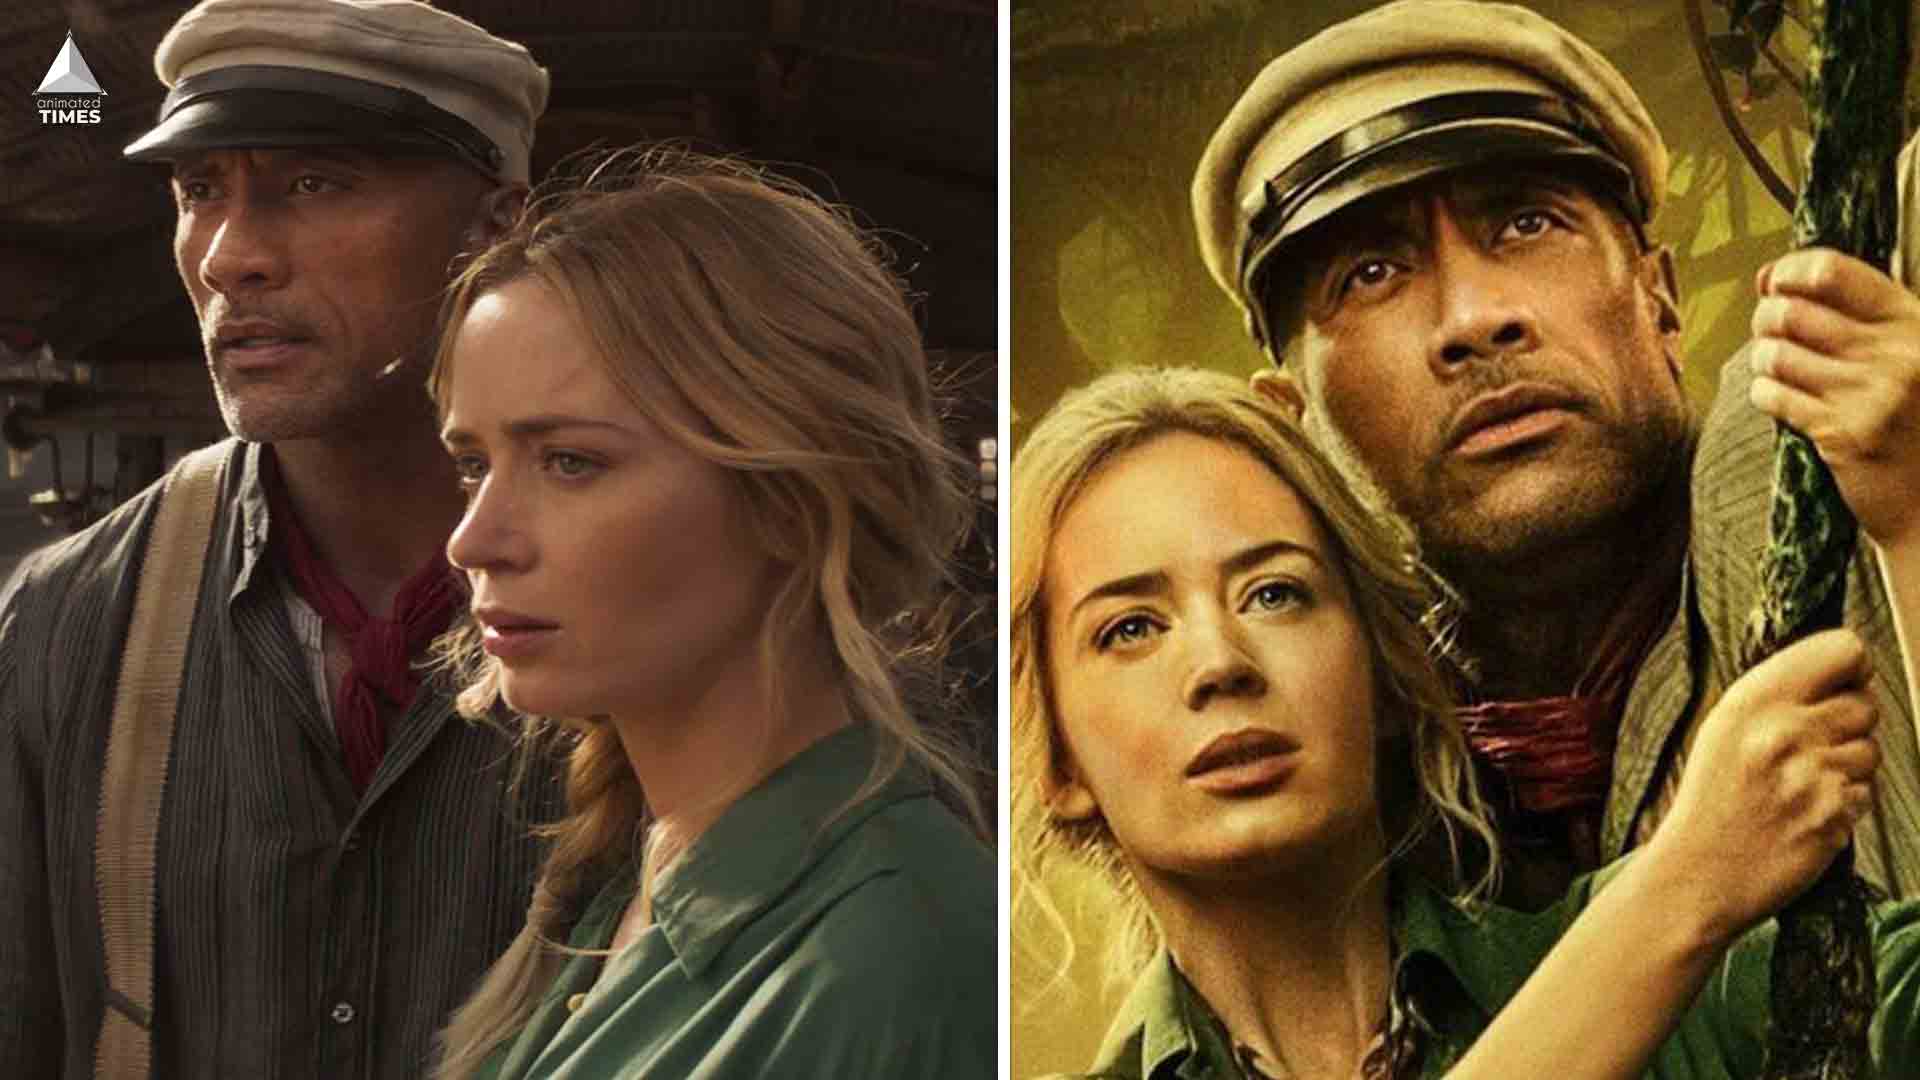 Here Is What Fans Are Saying About Dwayne Johnson Starrer Jungle Cruise